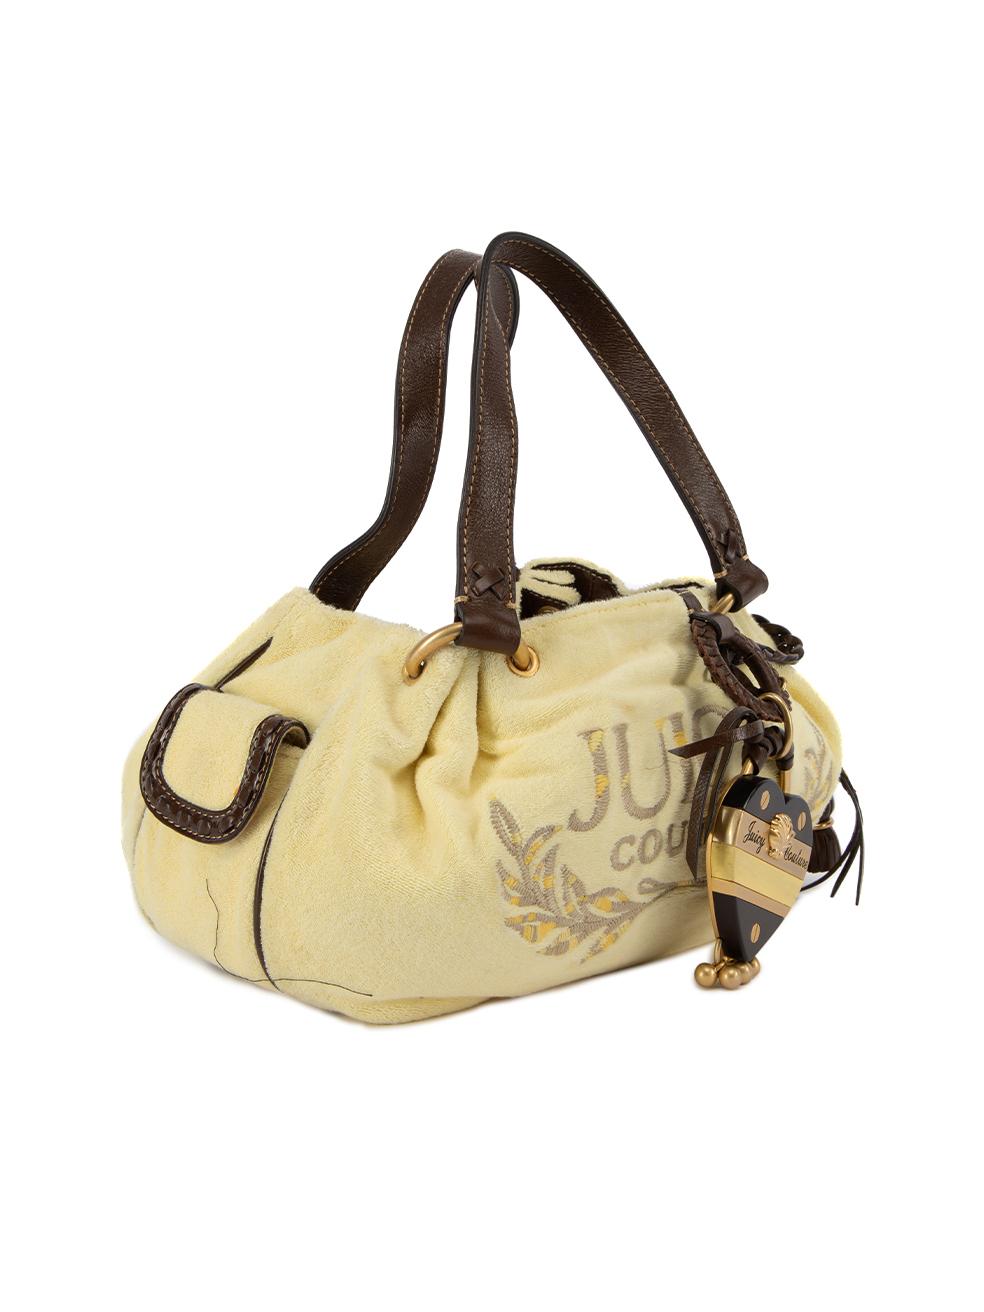 CONDITION is Very good. Hardly any visible wear to bag is evident. Small marks can be seen on the heart decorative item on this used Juicy Cotoure designer resale item. Details Yellow and brown Velvet and faux leather Medium shoulder bag Juicy